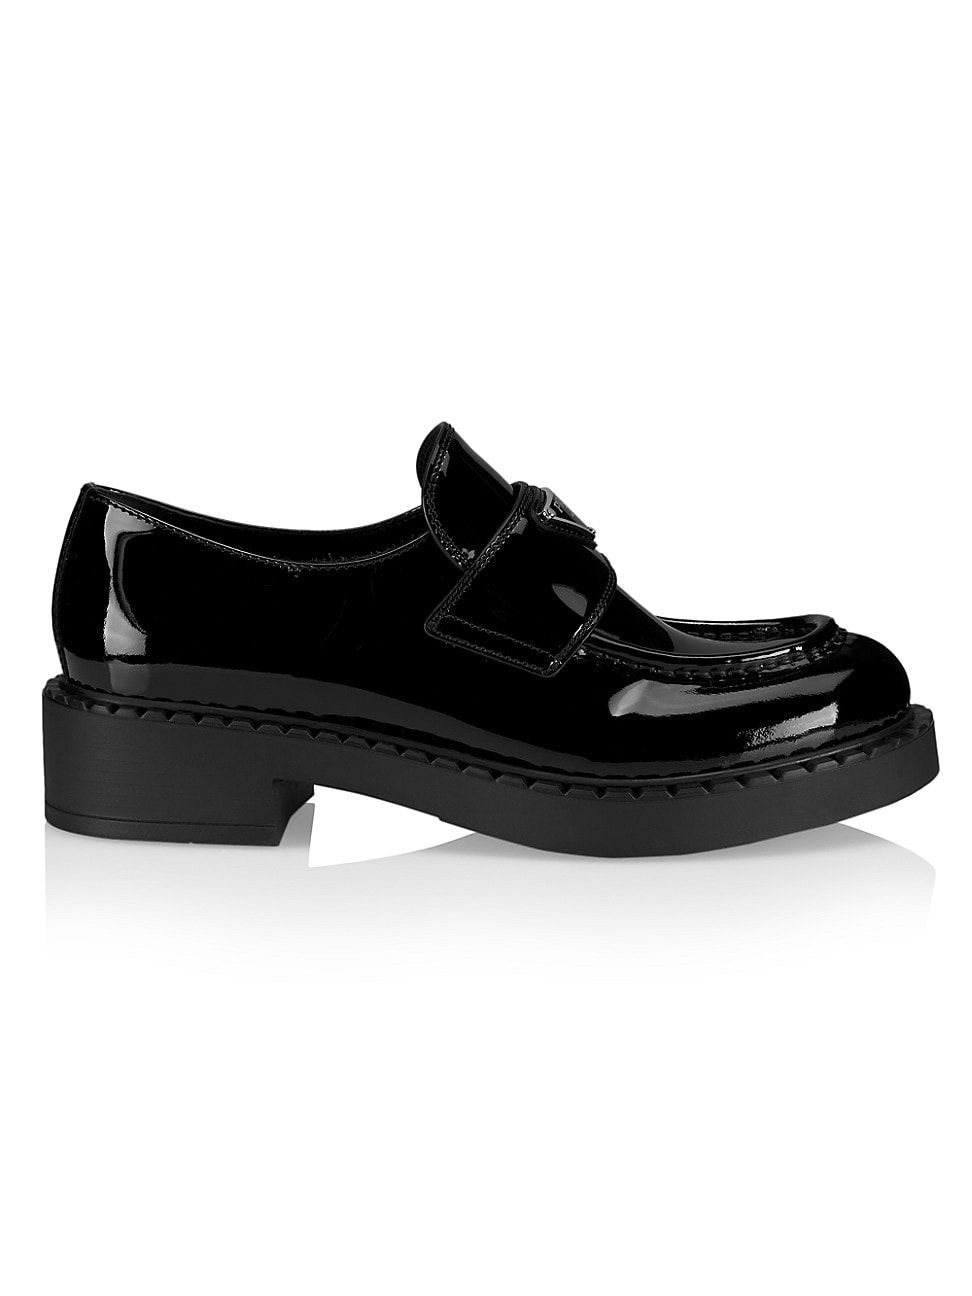 Women's Triangle Logo Patent Leather Loafers - Nero - Size 5.5 | Saks Fifth Avenue